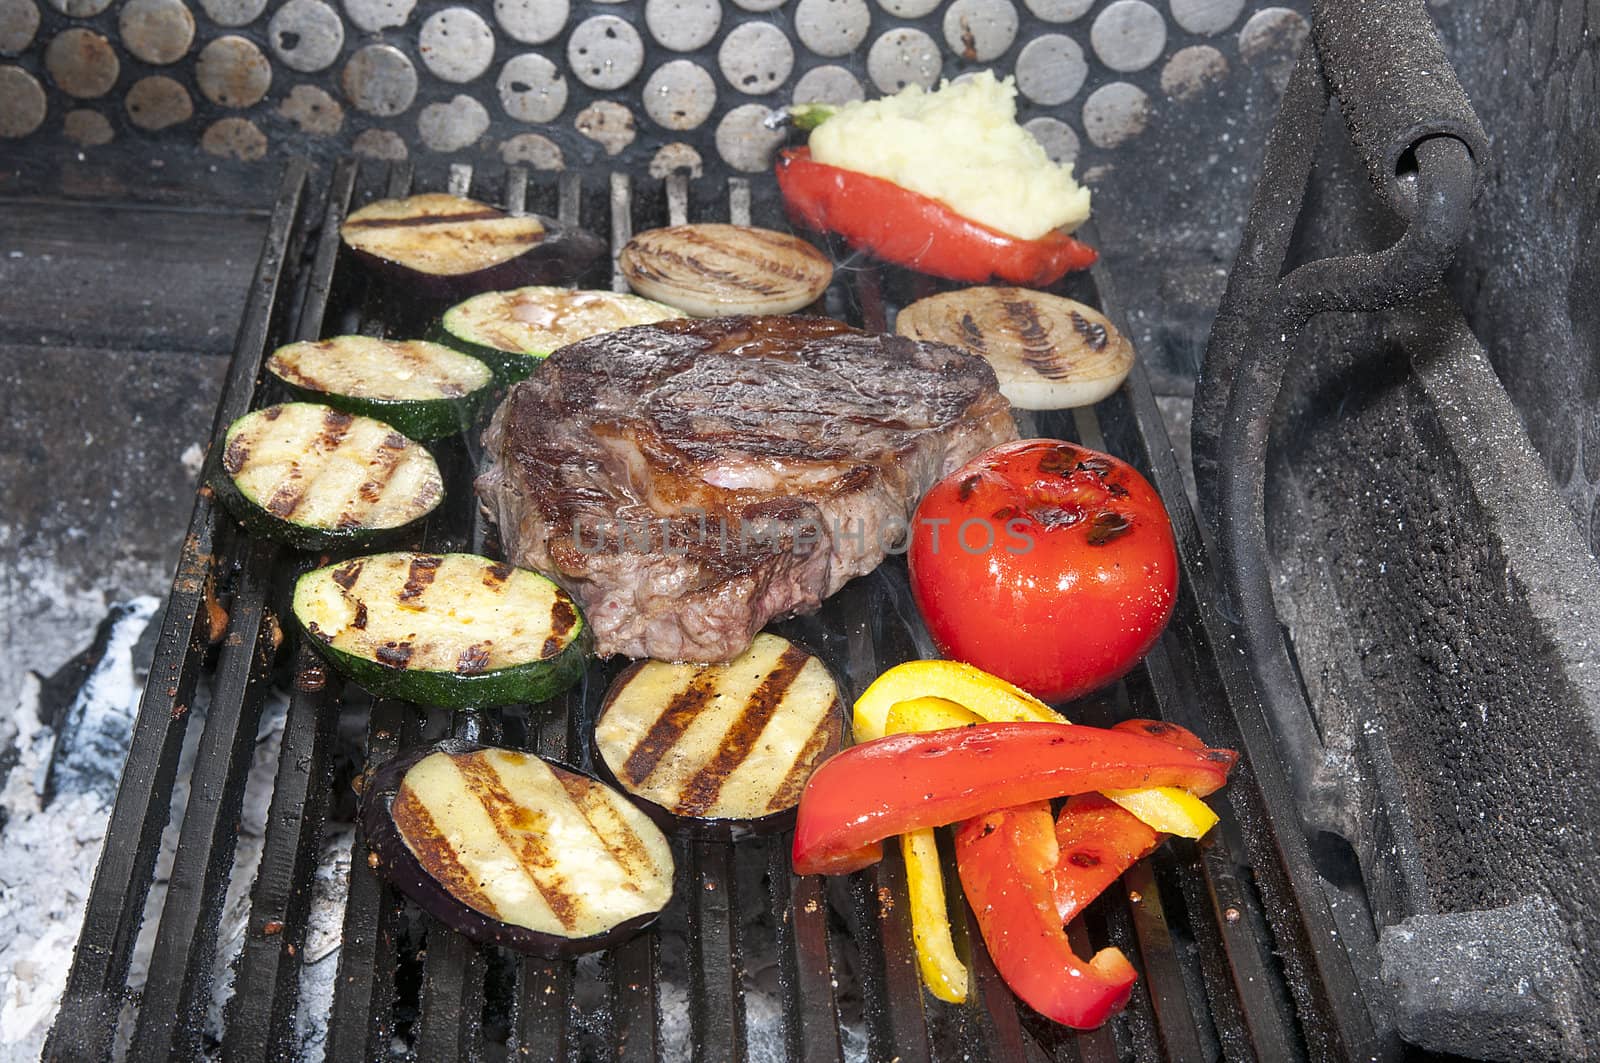 Grilled vegetables are cooking with fire